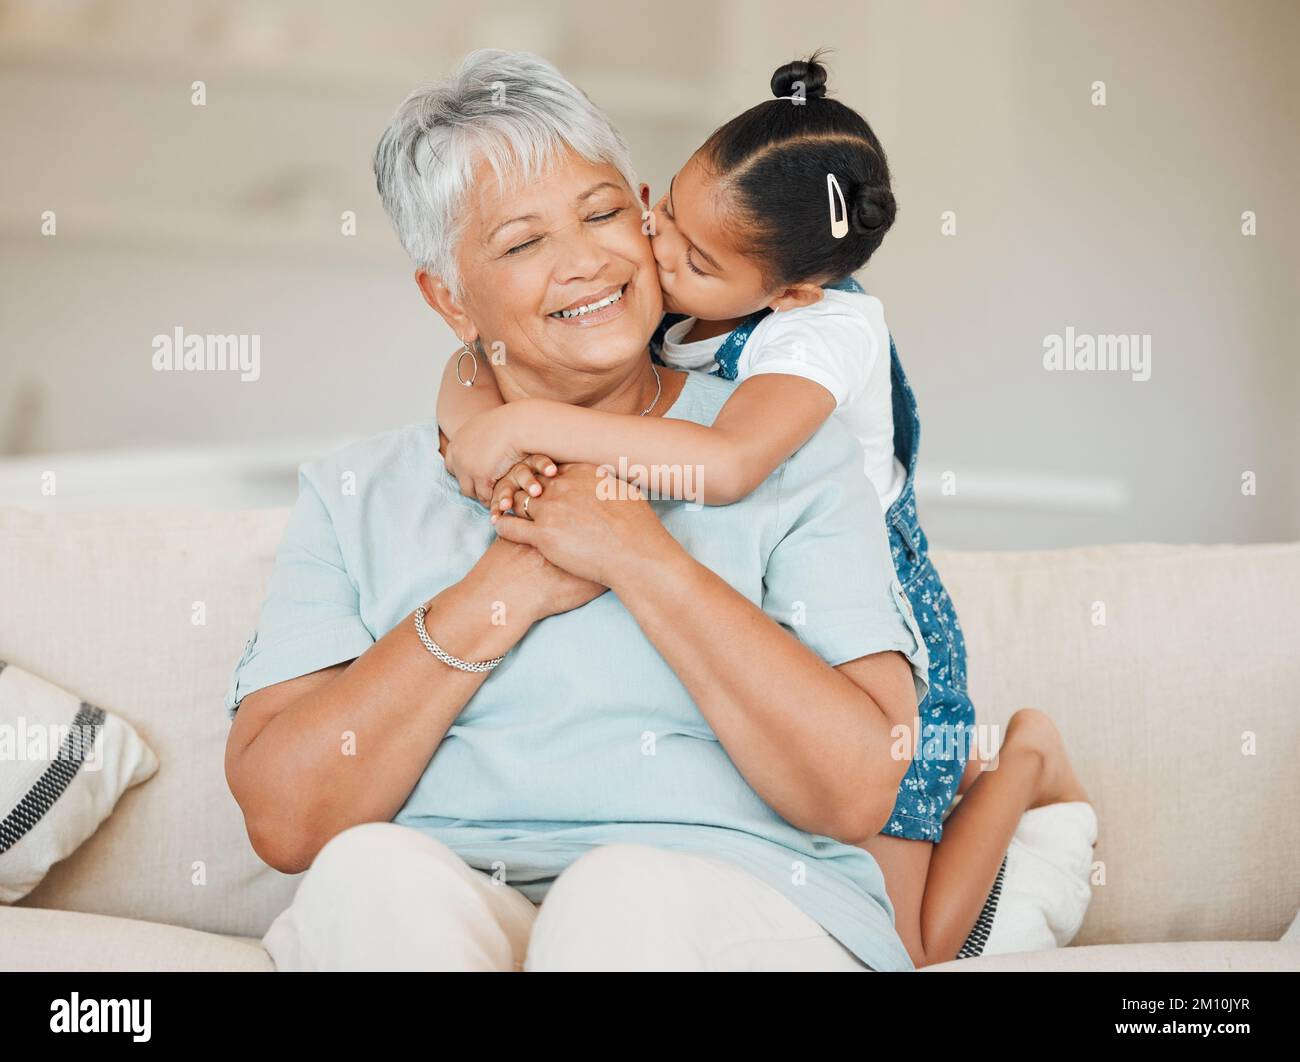 Blended families woven together by choice. a grandmother and granddaughter bonding on the sofa at home. Stock Photo